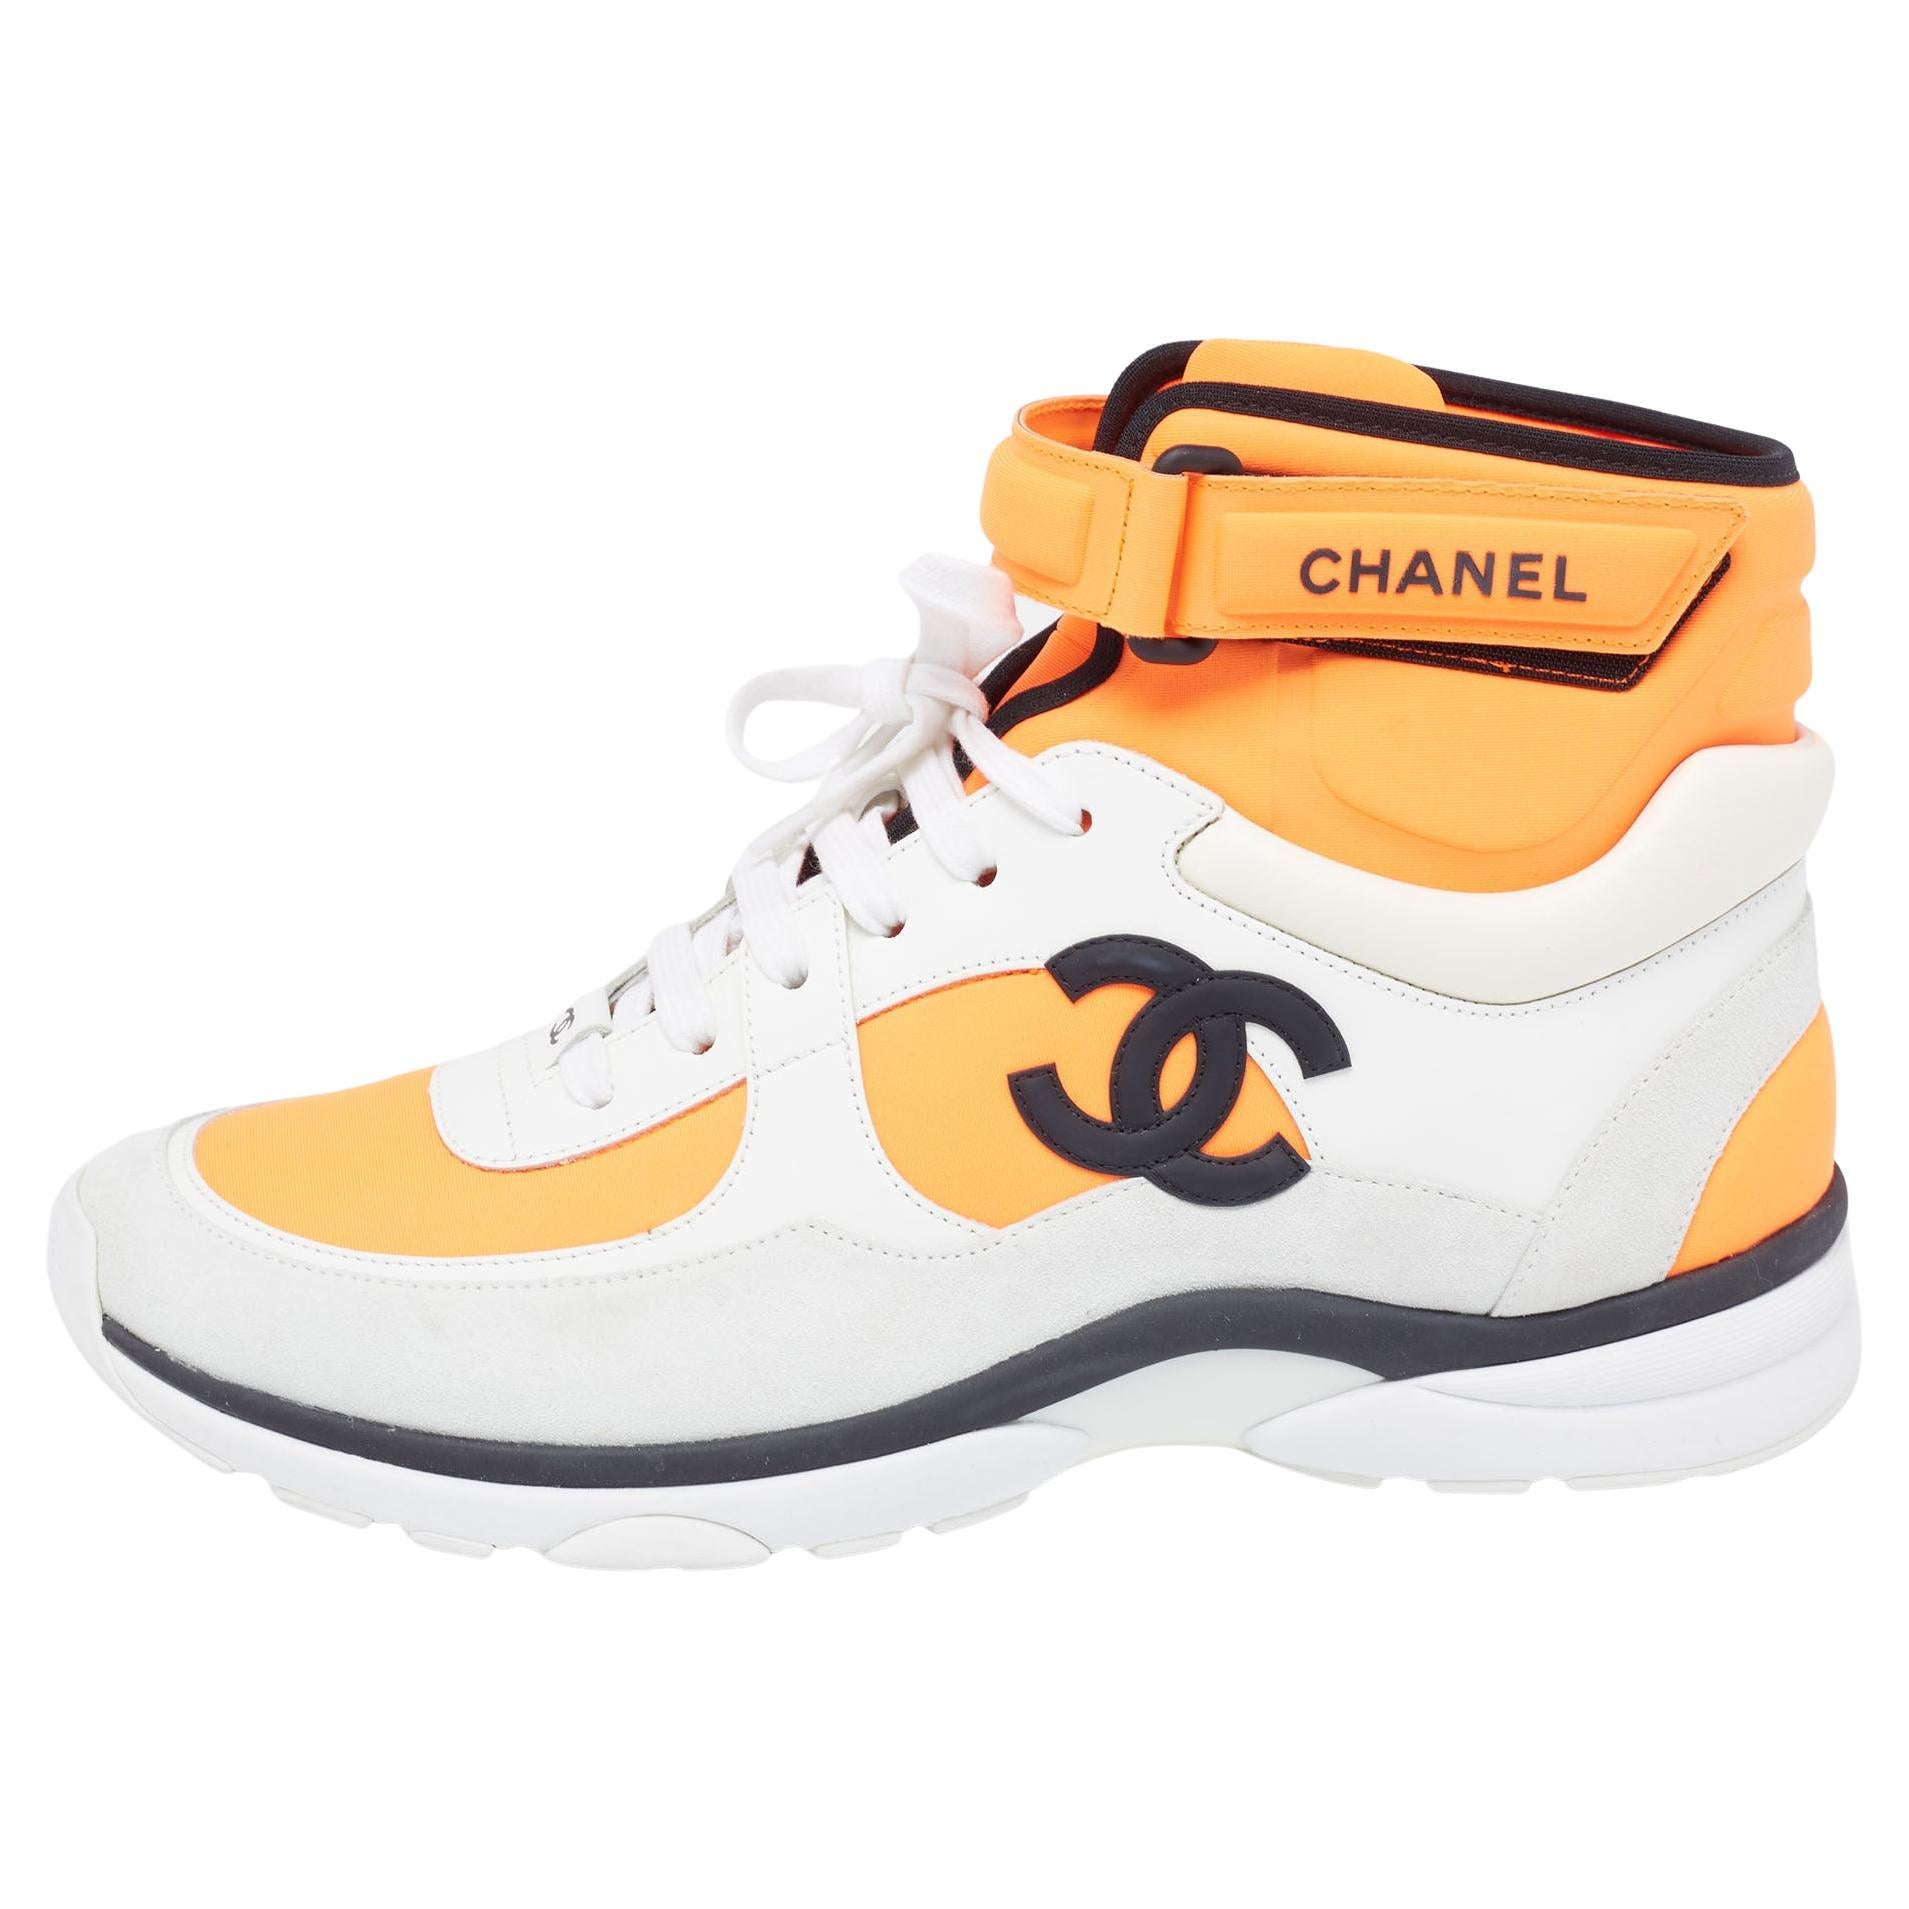 Chanel Sneakers Size 42 - 4 For Sale on 1stDibs | chanel sneakers 42